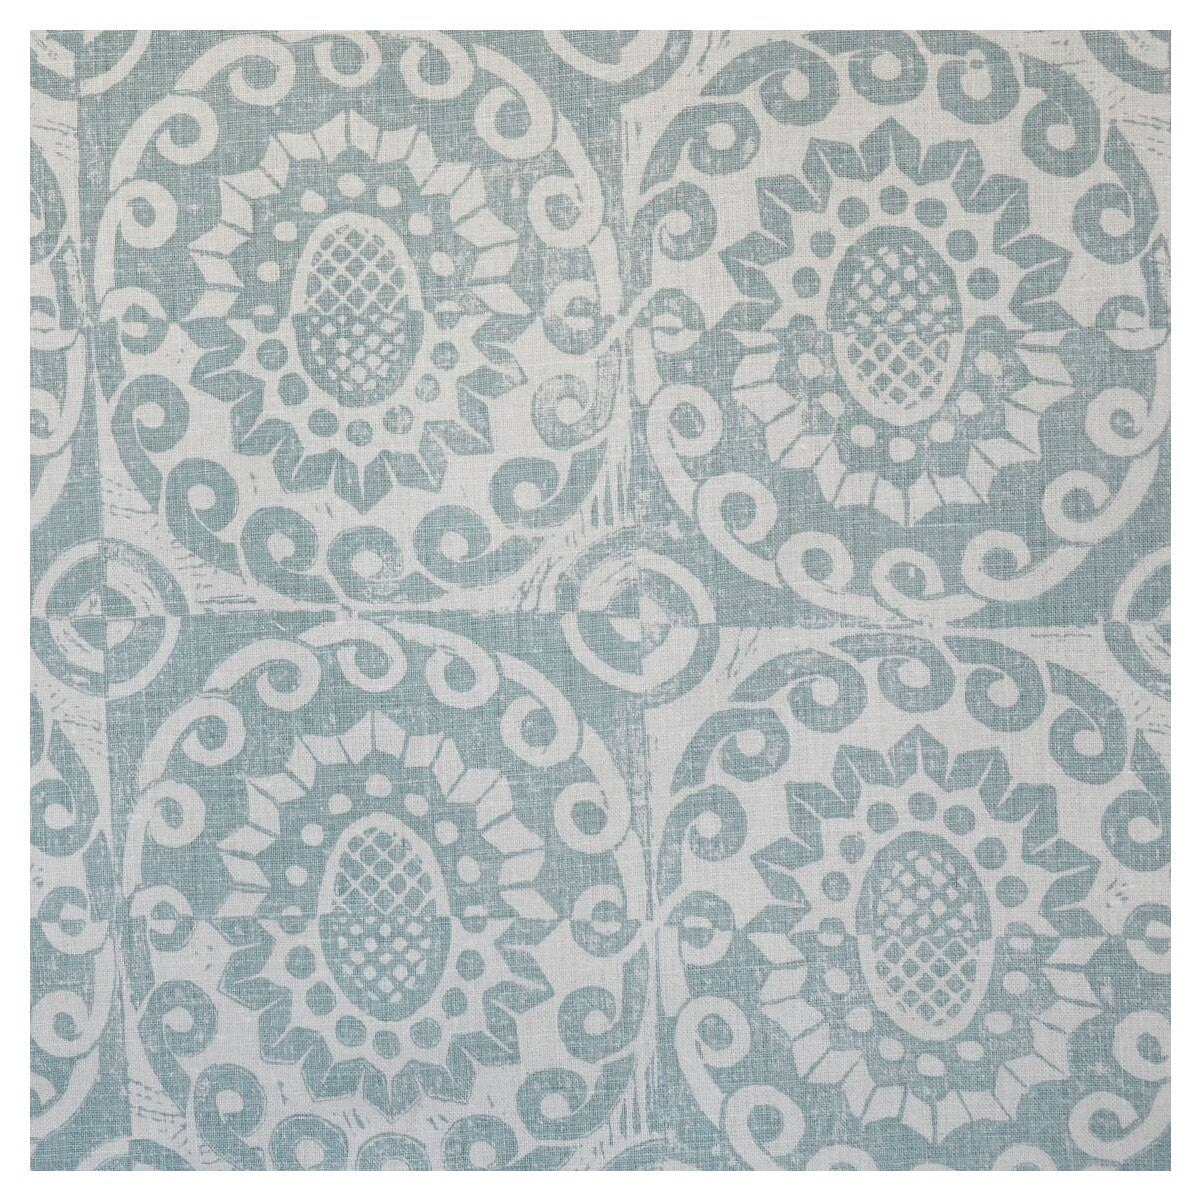 Pineapple On Oyster fabric in aqua color - pattern BFC-3623.3.0 - by Lee Jofa in the Blithfield collection